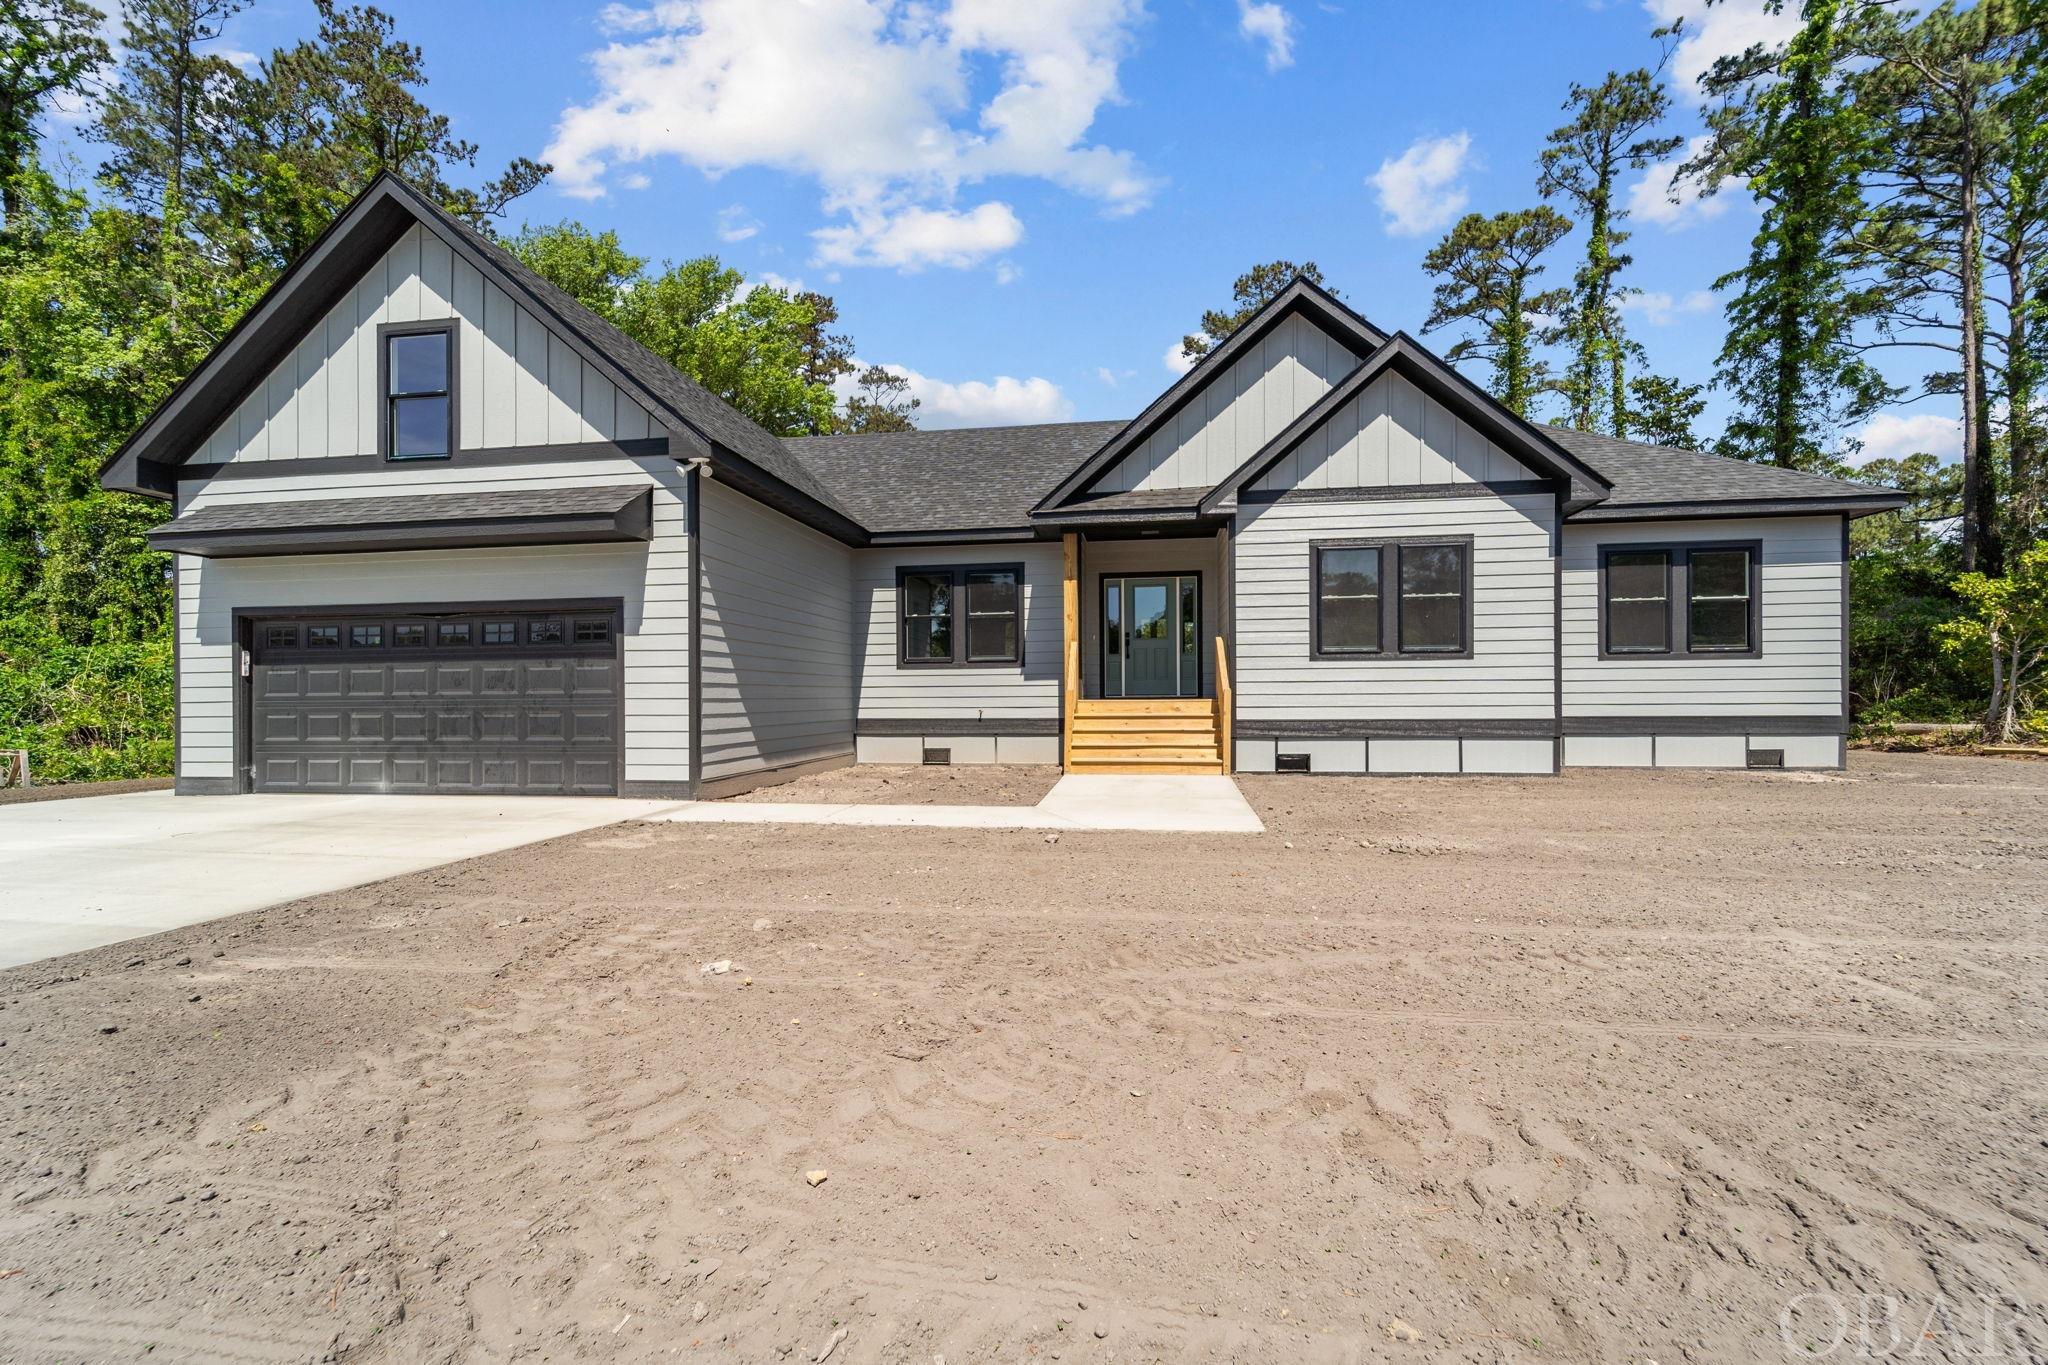 Beginning stages of construction, plans are in associated docs.  The plans have been modified to add a bedroom upstairs, bringing the total square footage to approximately 2,500 heated sq. ft.  Get in this one early to customize your new home.